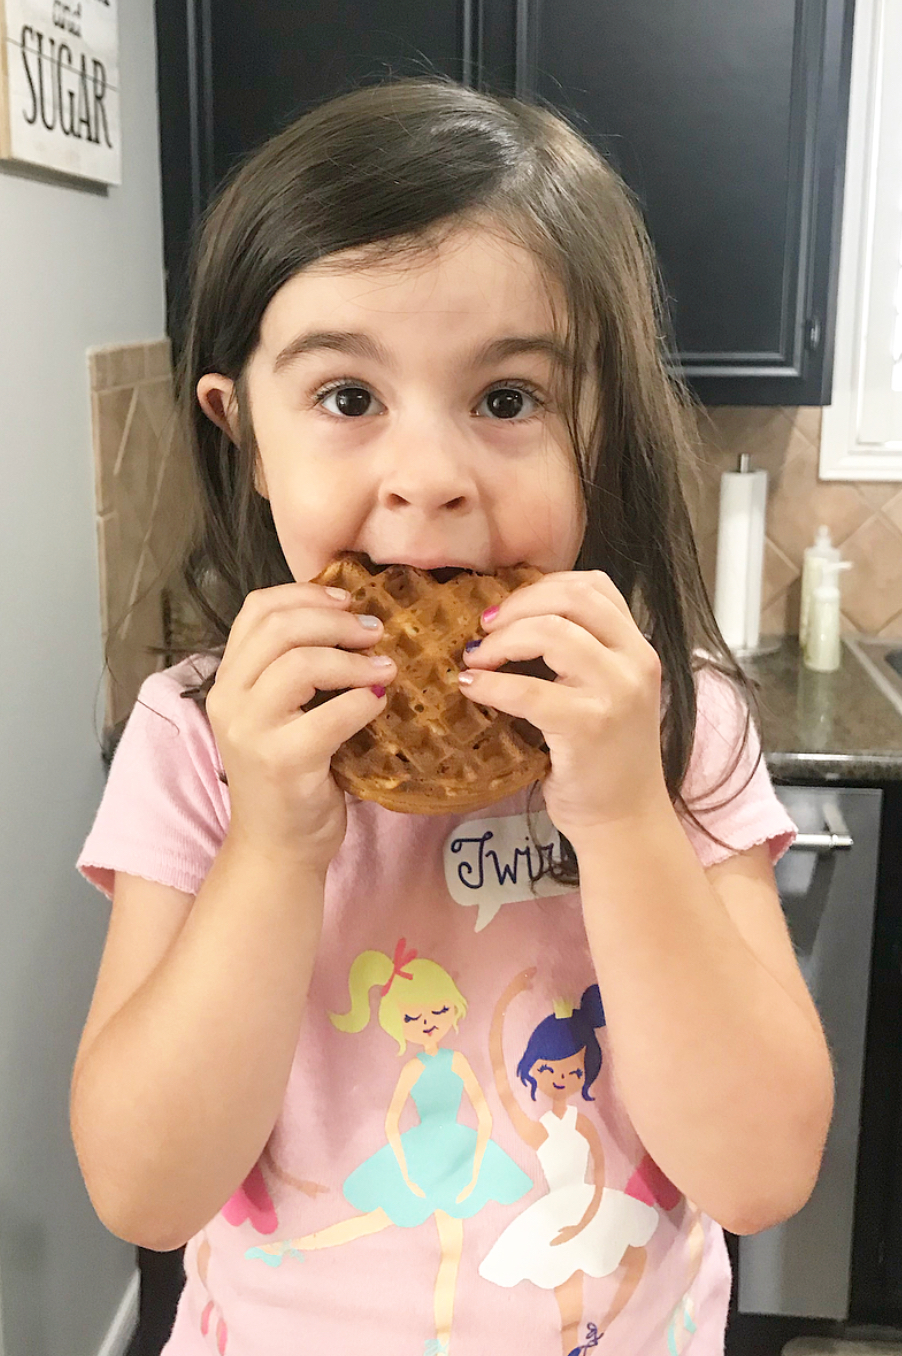  My 4-year-old caught in the act sneaking a waffle! 